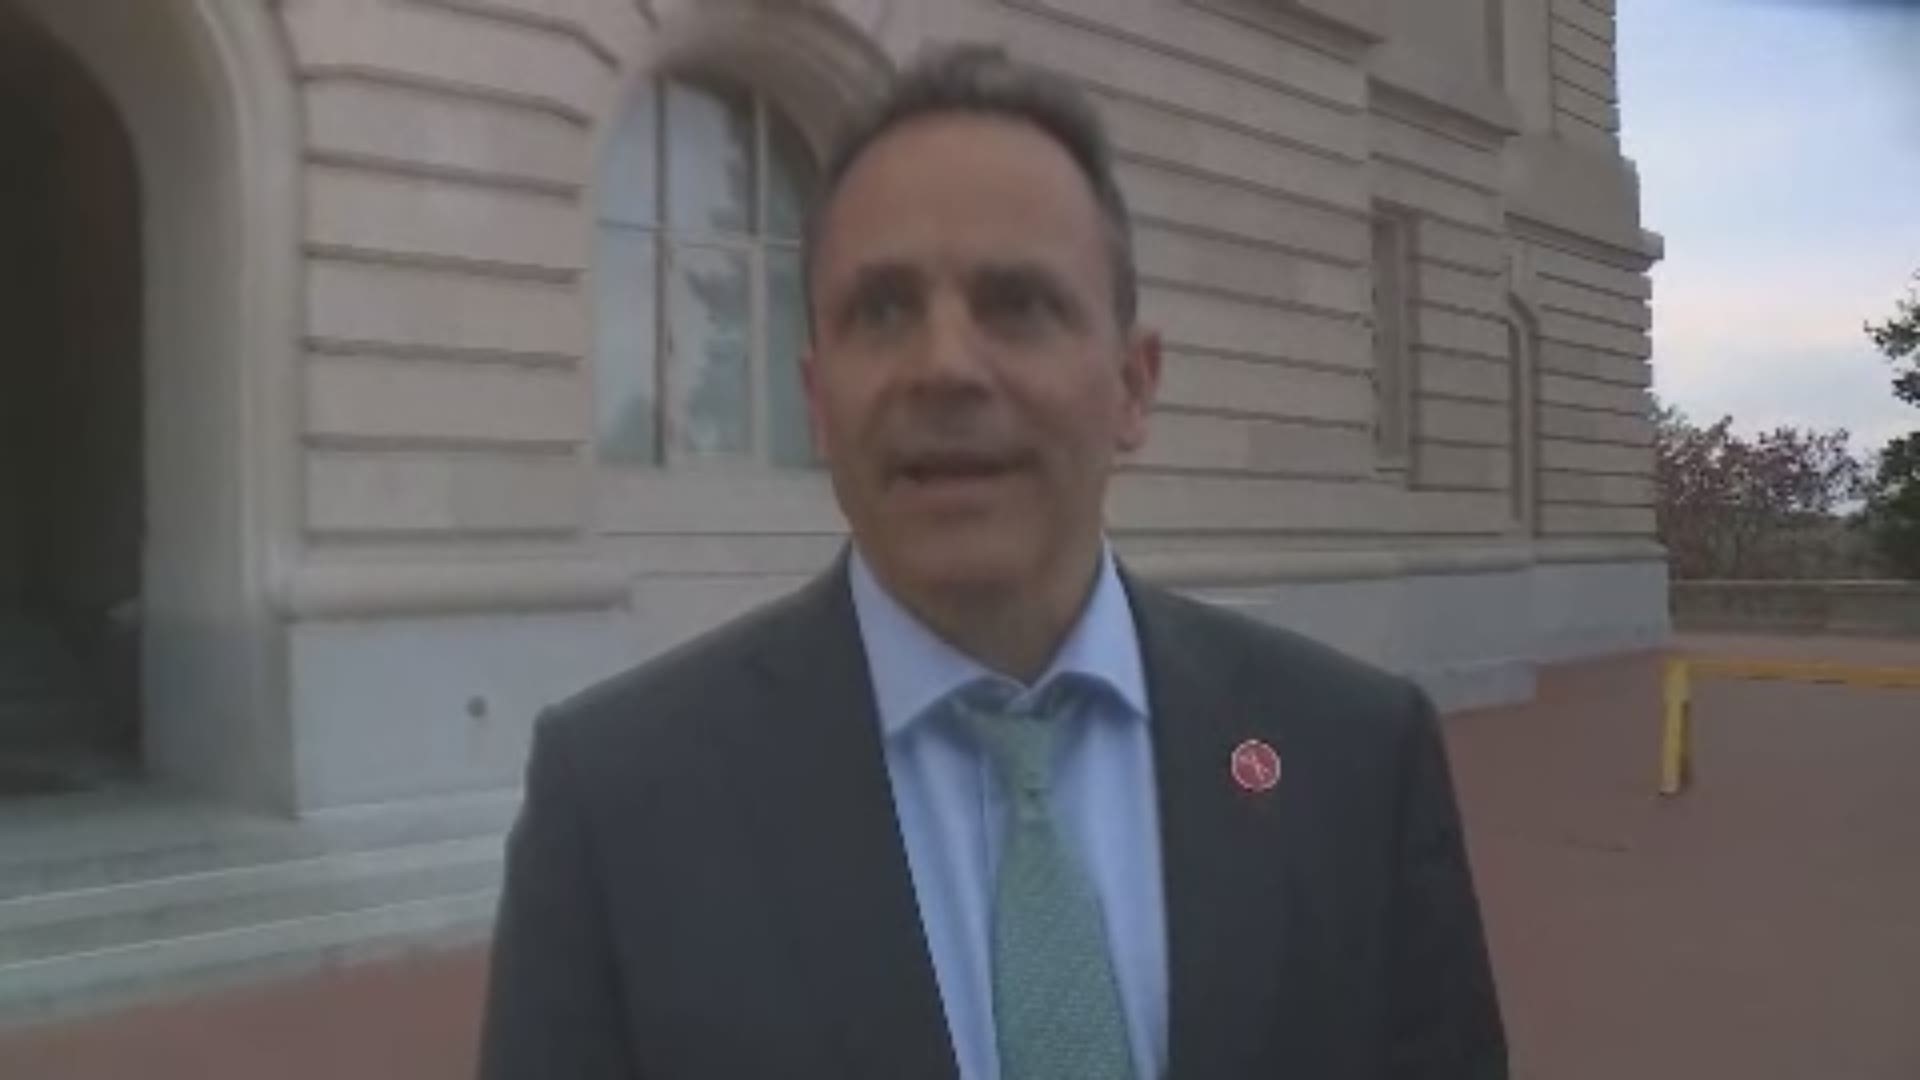 Full interview with Gov. Bevin on teacher rally